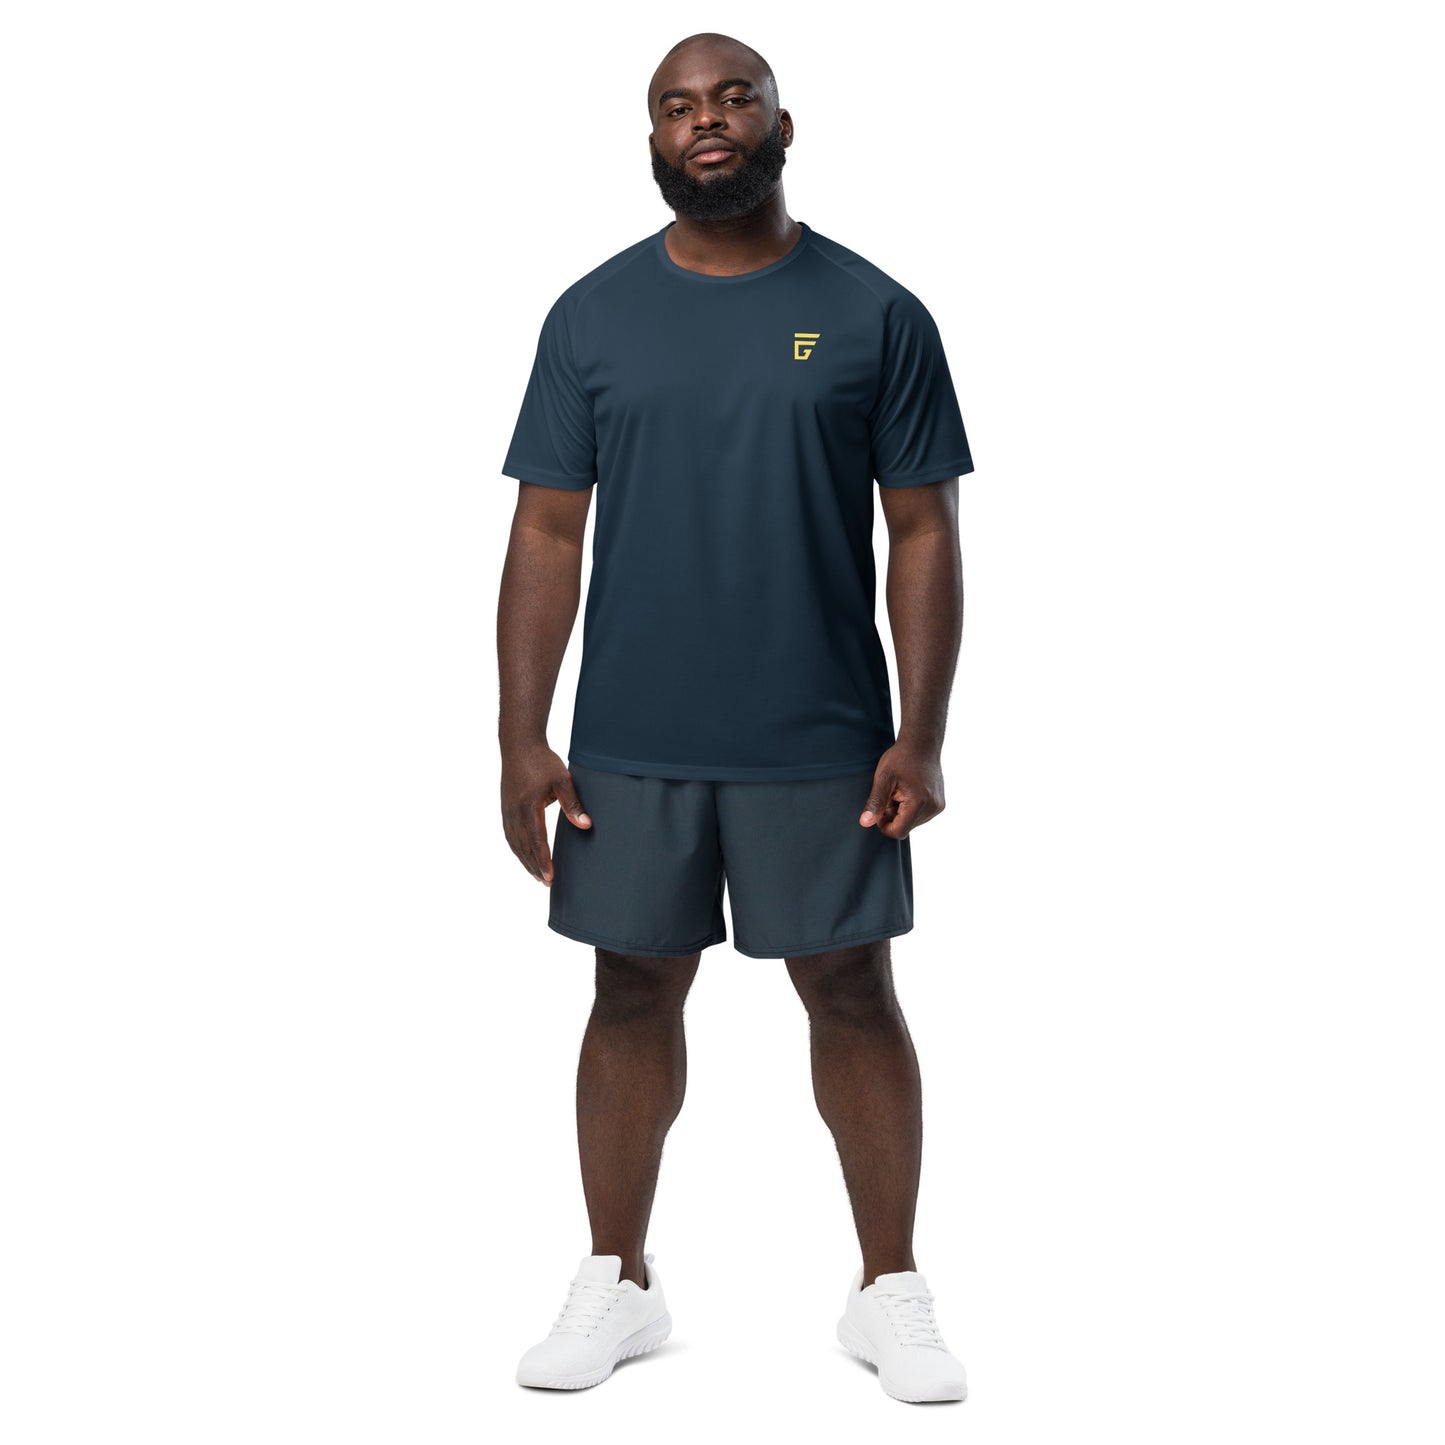 G-FORCE FITNESS sports jersey